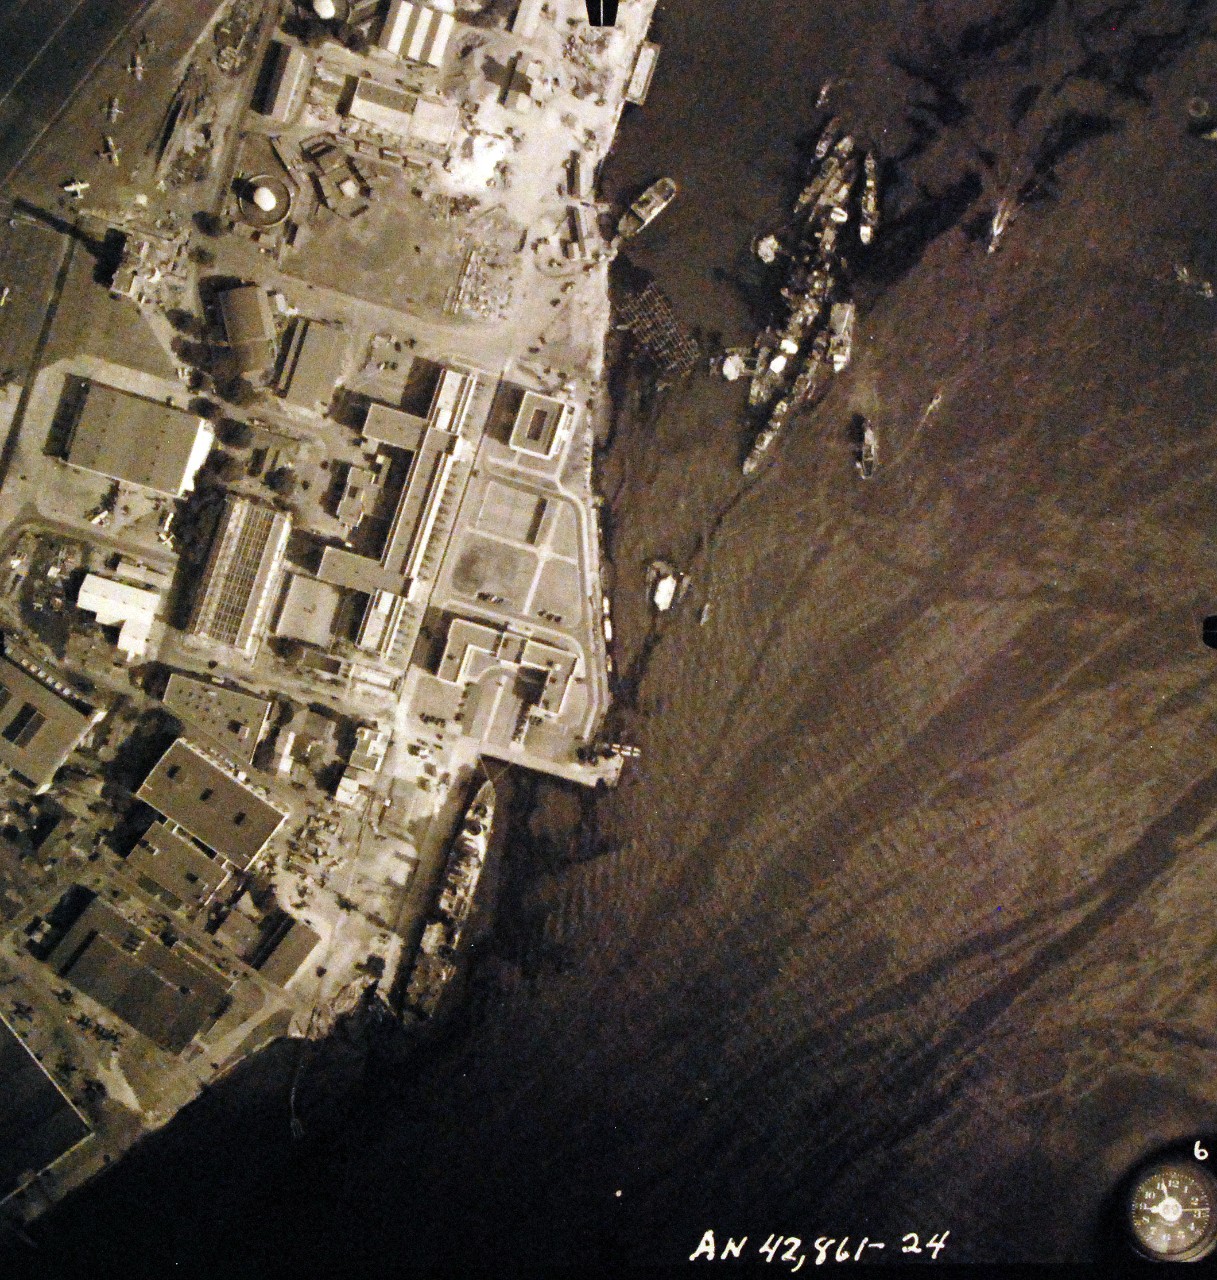 80-G-387585:  Pearl Harbor Attack, 7 December 1941.  Aerial view of "Battleship Row" moorings on the southern side of Ford Island, 10 December 1941, showing damage from the Japanese raid three days earlier.  Ships, (left to right), USS Curtiss (AV 4) and USS California (BB 44).  Note dark oil streaks on the harbor surface, originating from the sunken battleships.  Photographed by VJ-1 at an altitude of 3,000 feet and released November 9, 1950. U.S. Navy photograph, now in the collections of the National Archives.     (9/22/2015).